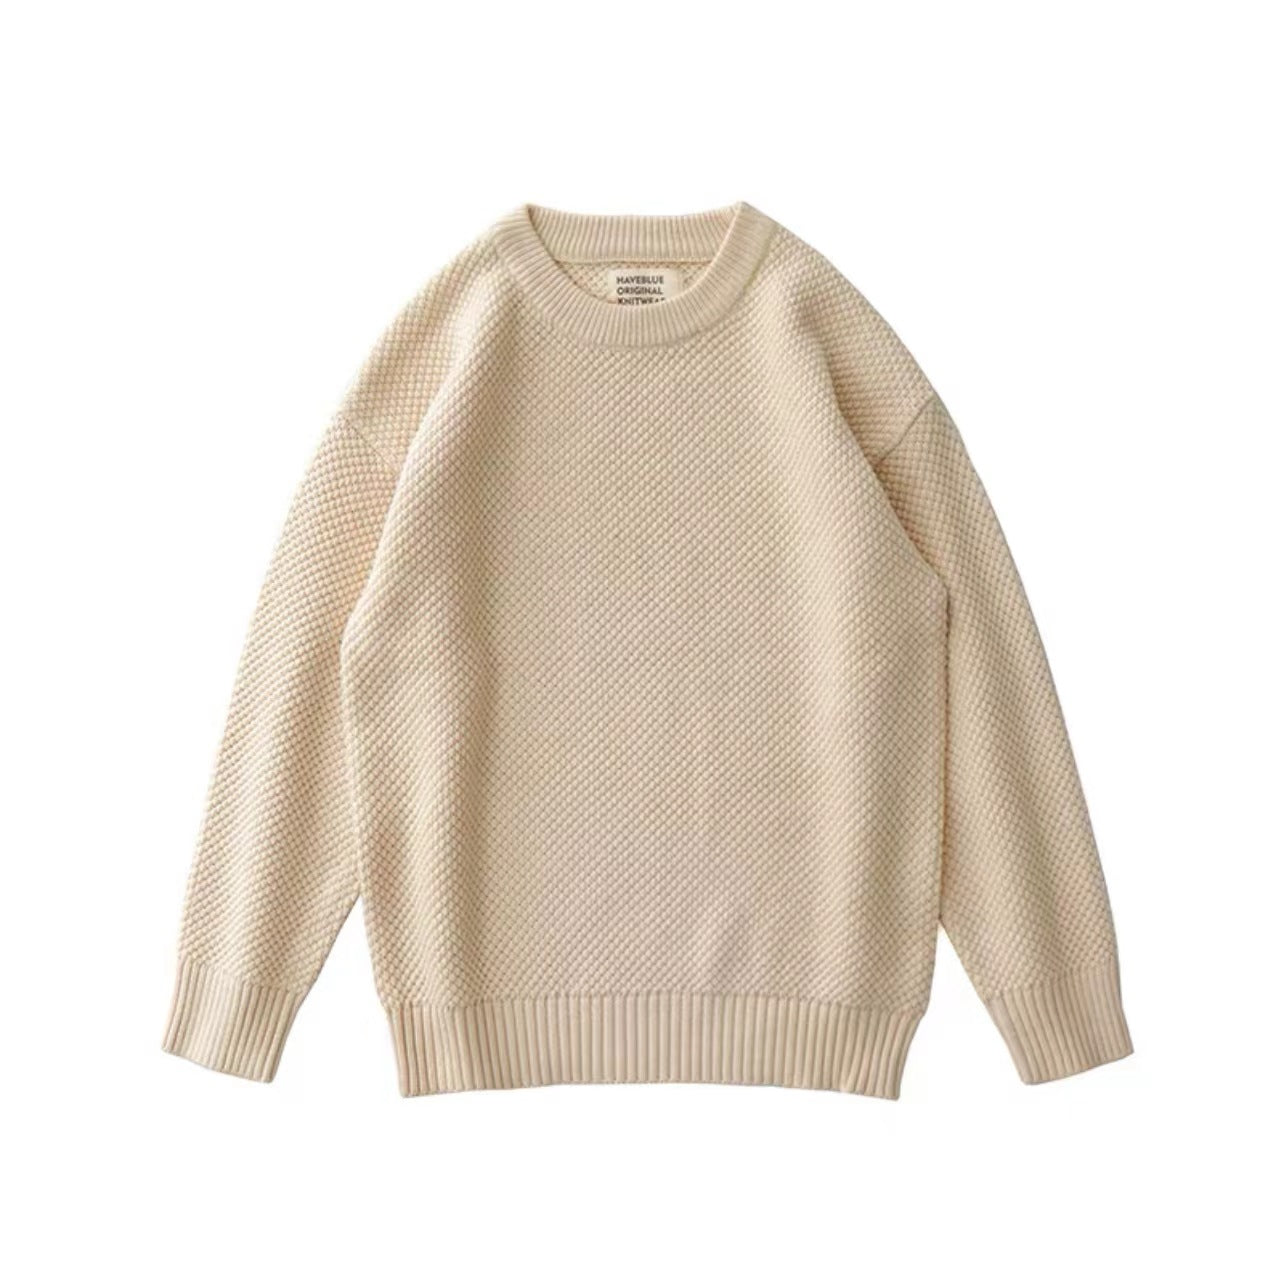 Men's Casaul Round Neck Casual Knit Sweater